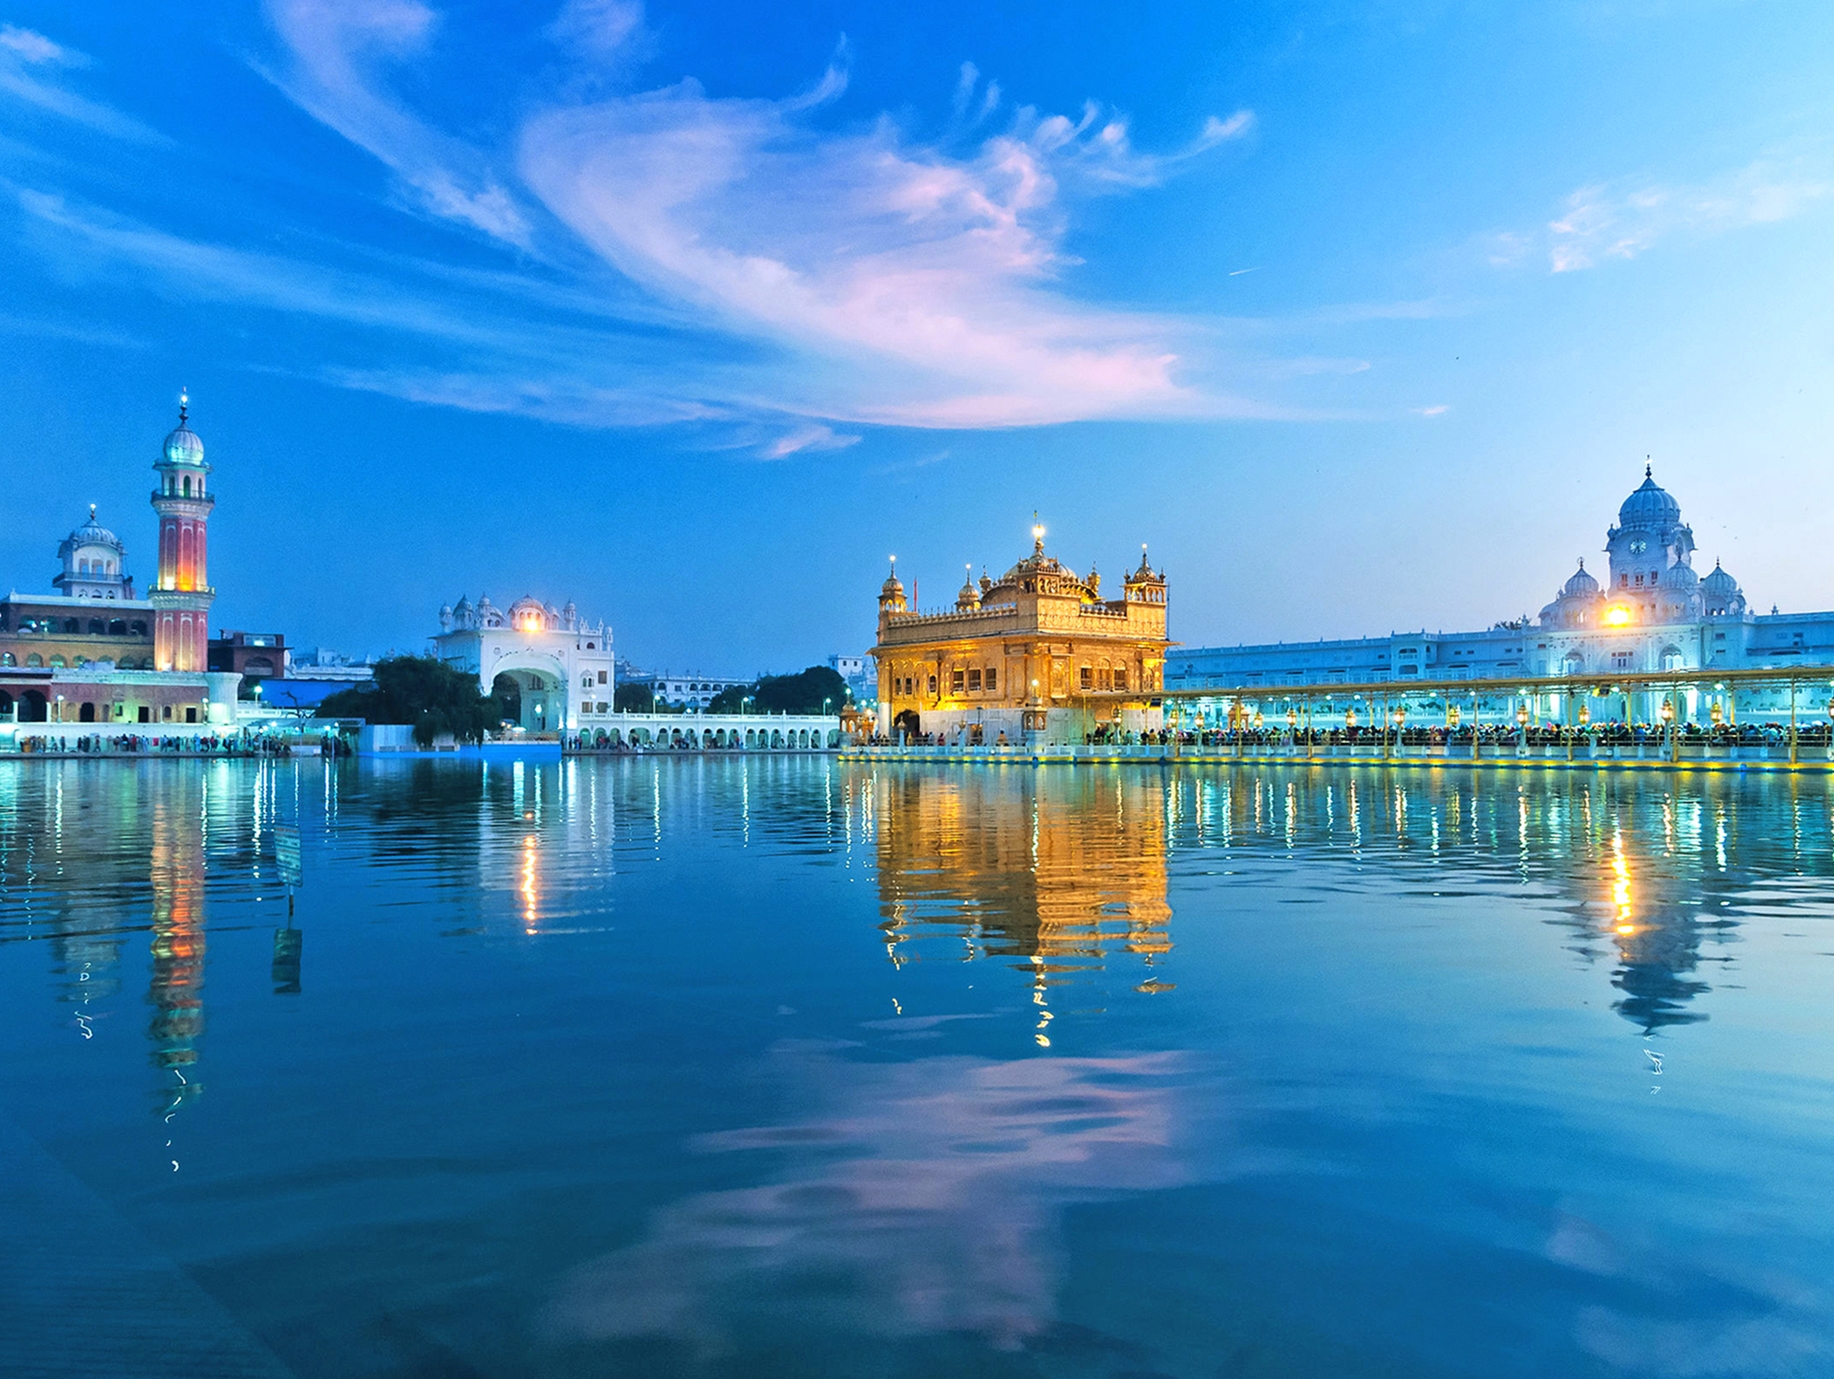 Image result for images of amritsar